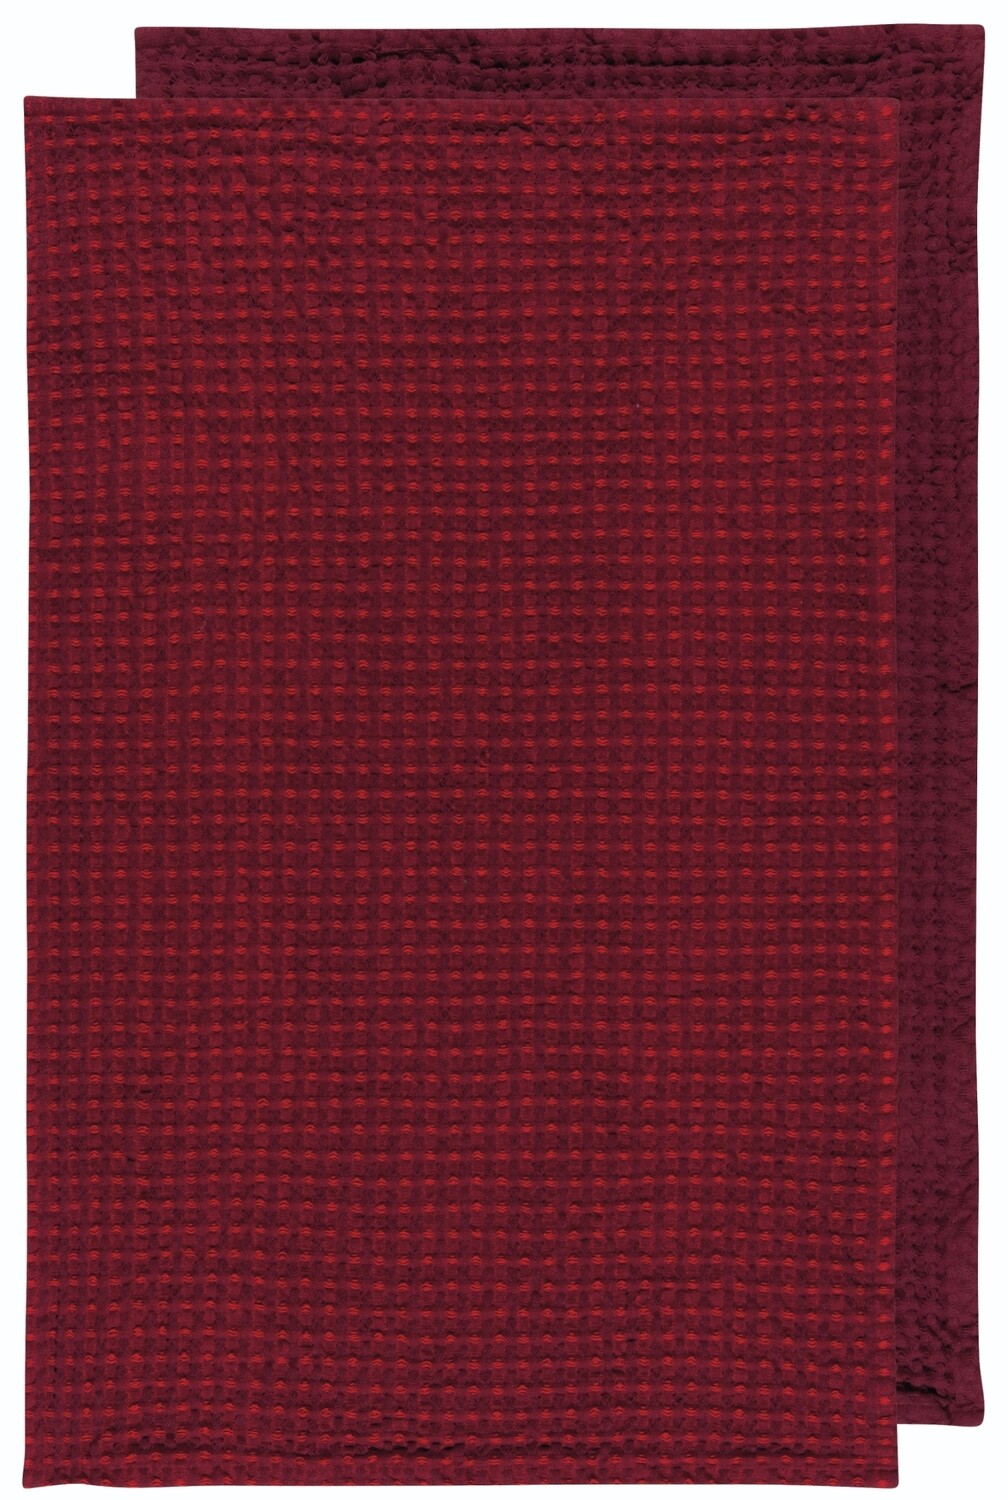 Now Designs Second Spin Waffle Dishtowels (Set of 2) - Burgundy